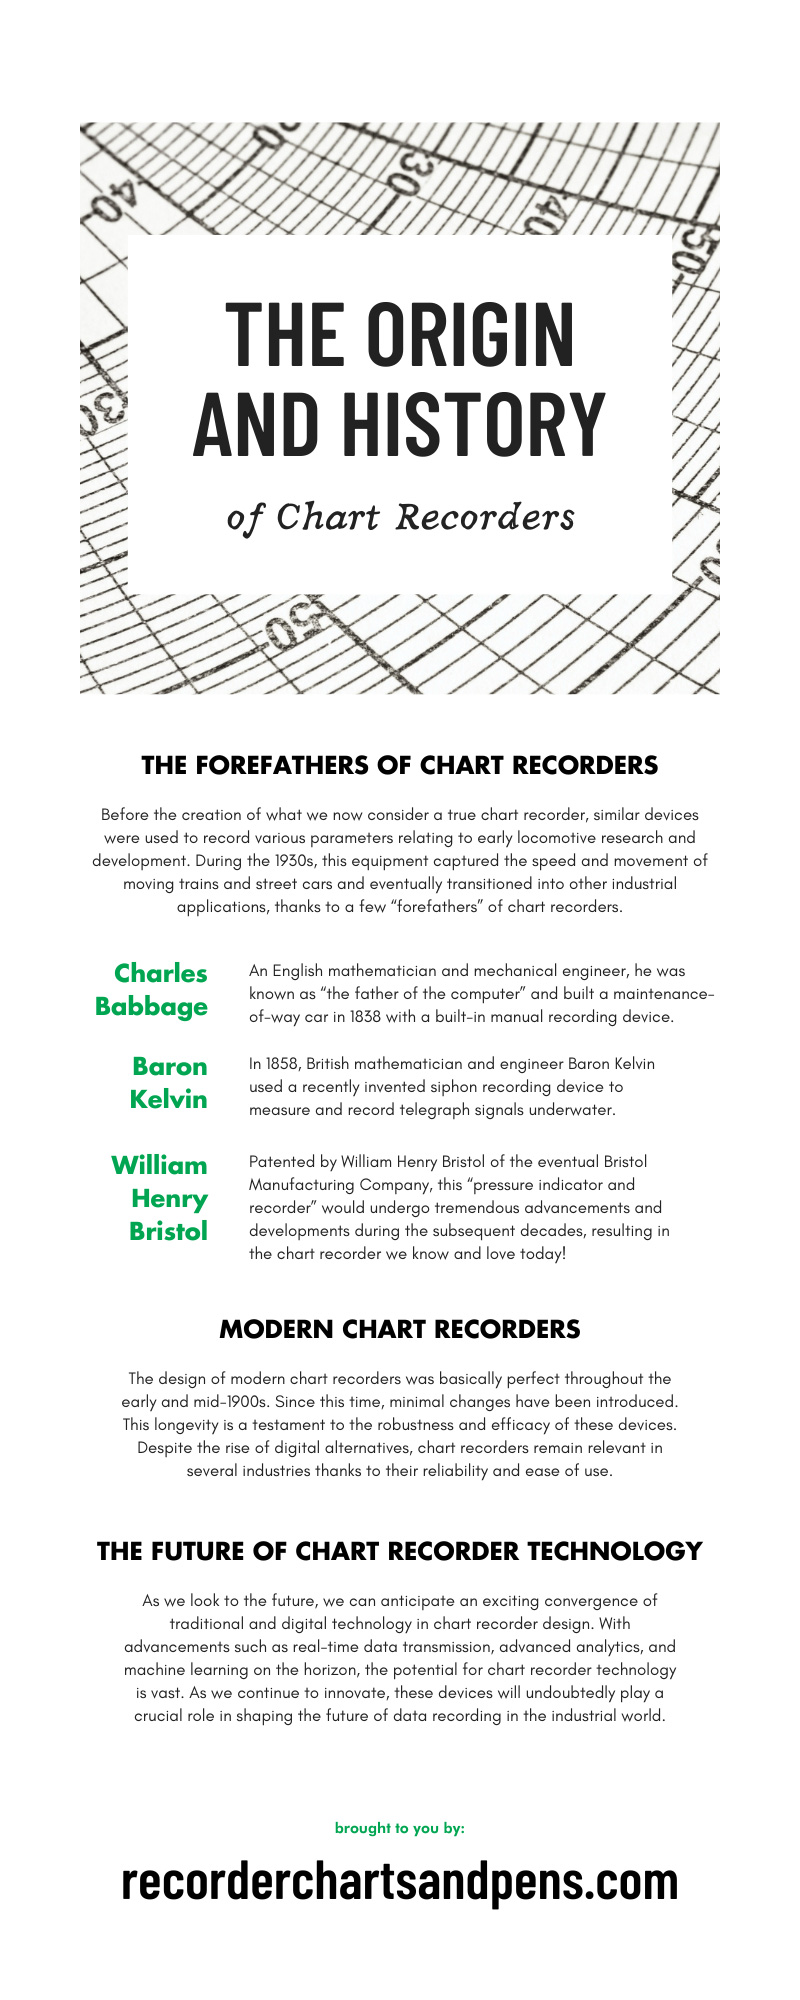 The Origin and History of Chart Recorders